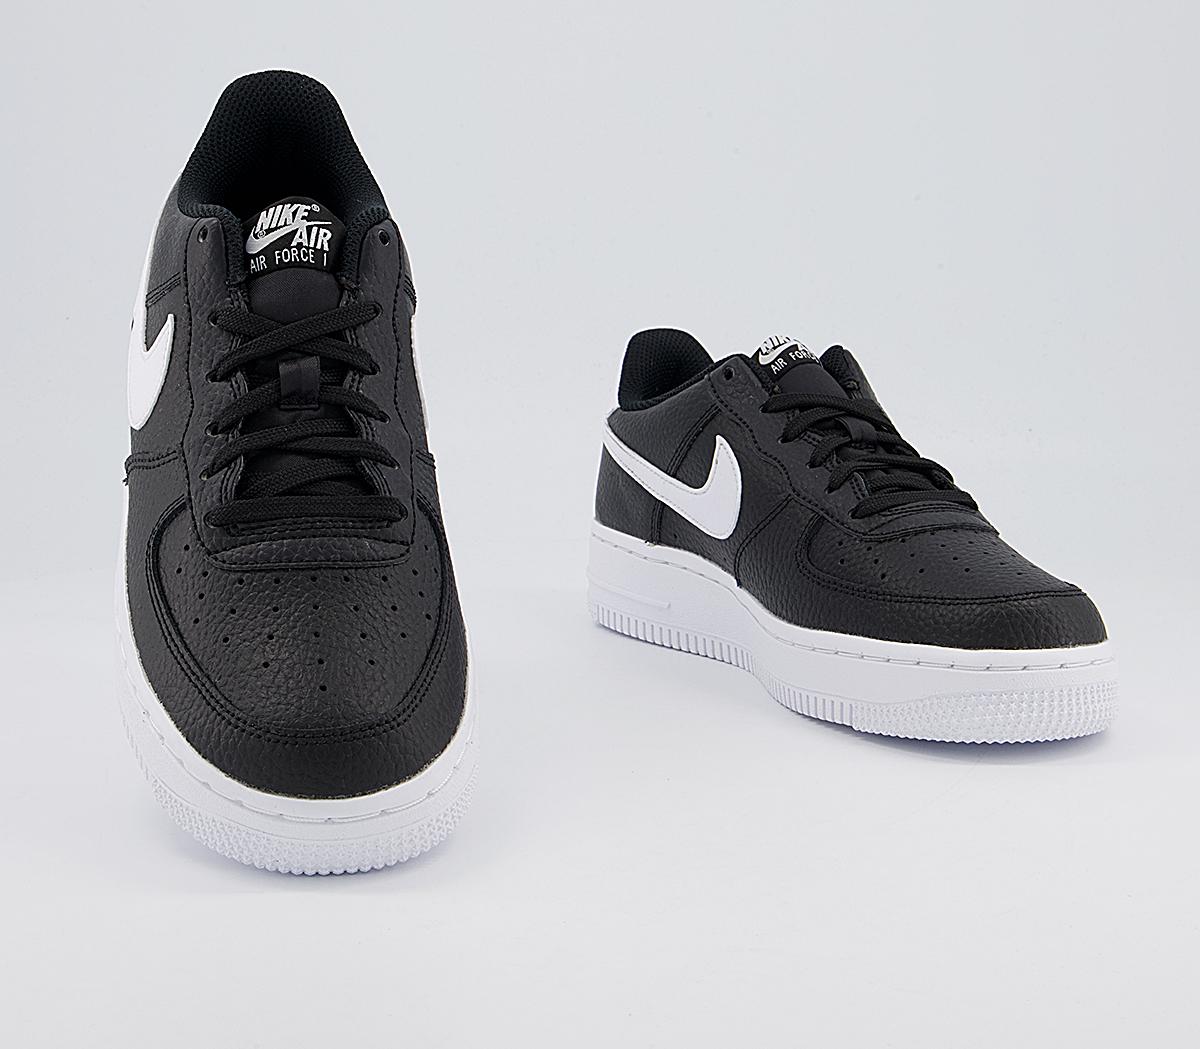 Nike Air Force 1 Boys Trainers Black White - Kids Trainers